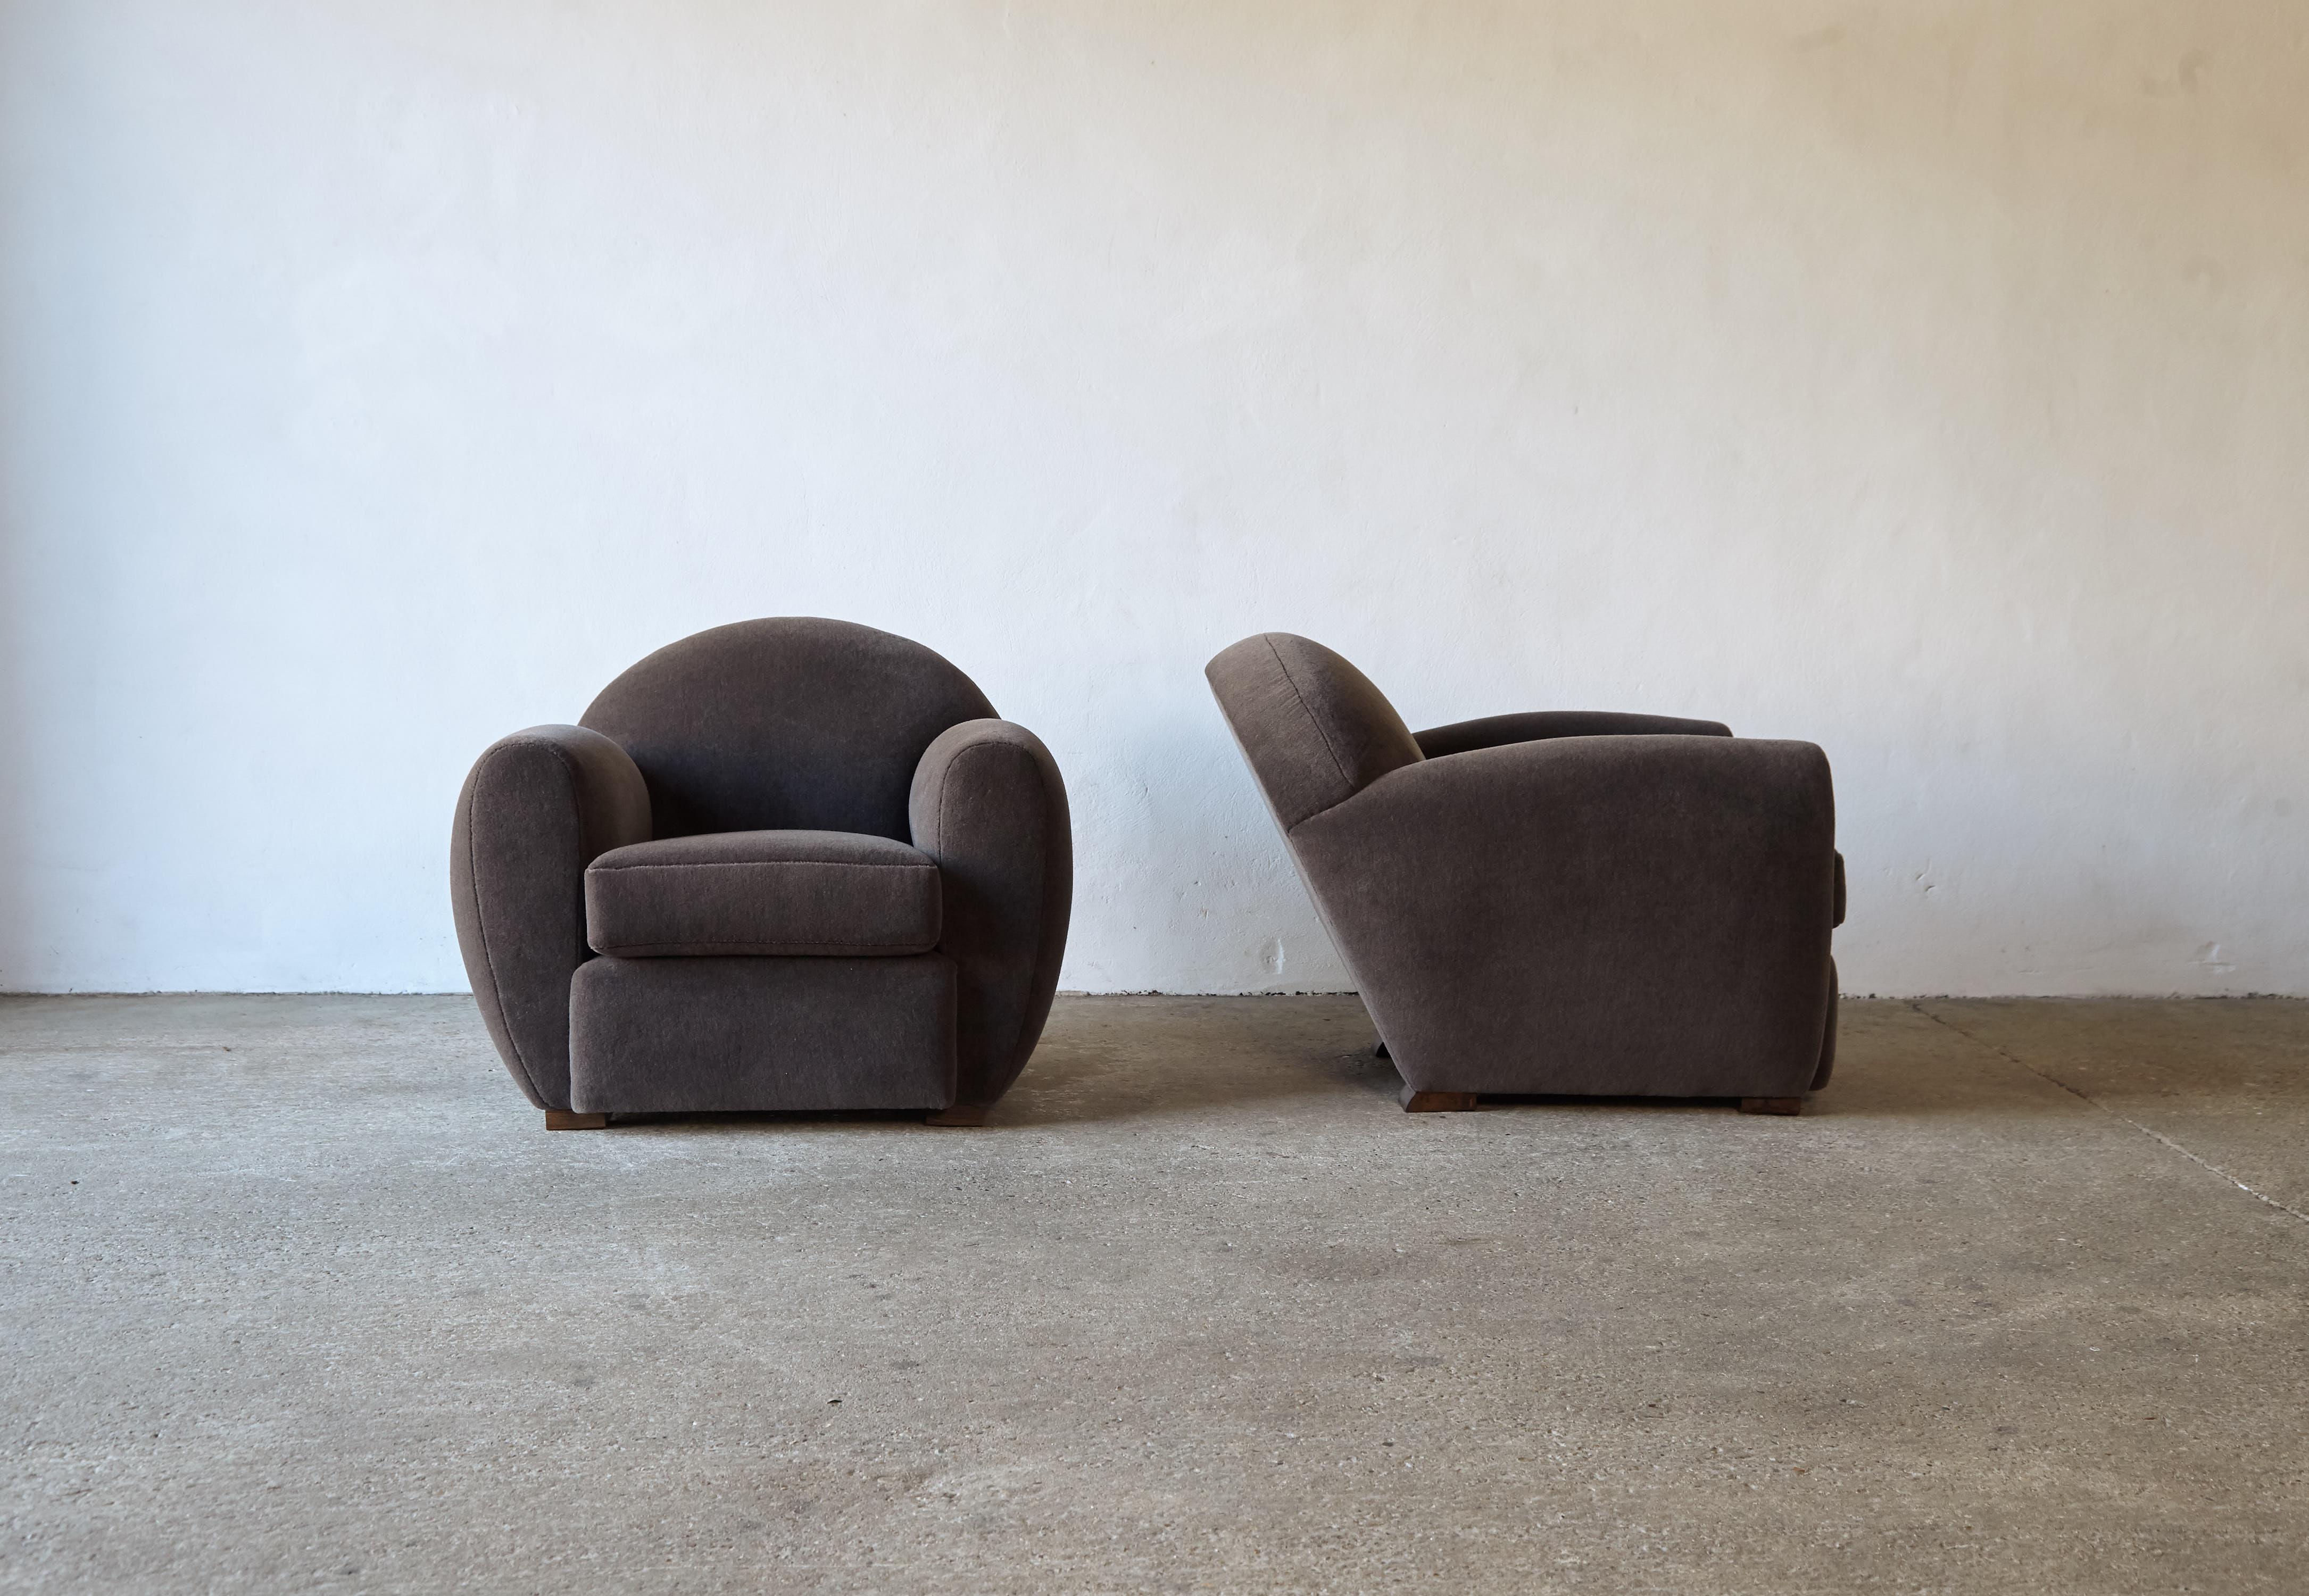 Superb pair of round, leaning modern club chairs, upholstered in pure Alpaca. High quality hand-made beech frames and newly upholstered in a soft, brown/grey premium 100% alpaca fabric. Fast shipping worldwide.



UK customers please note -